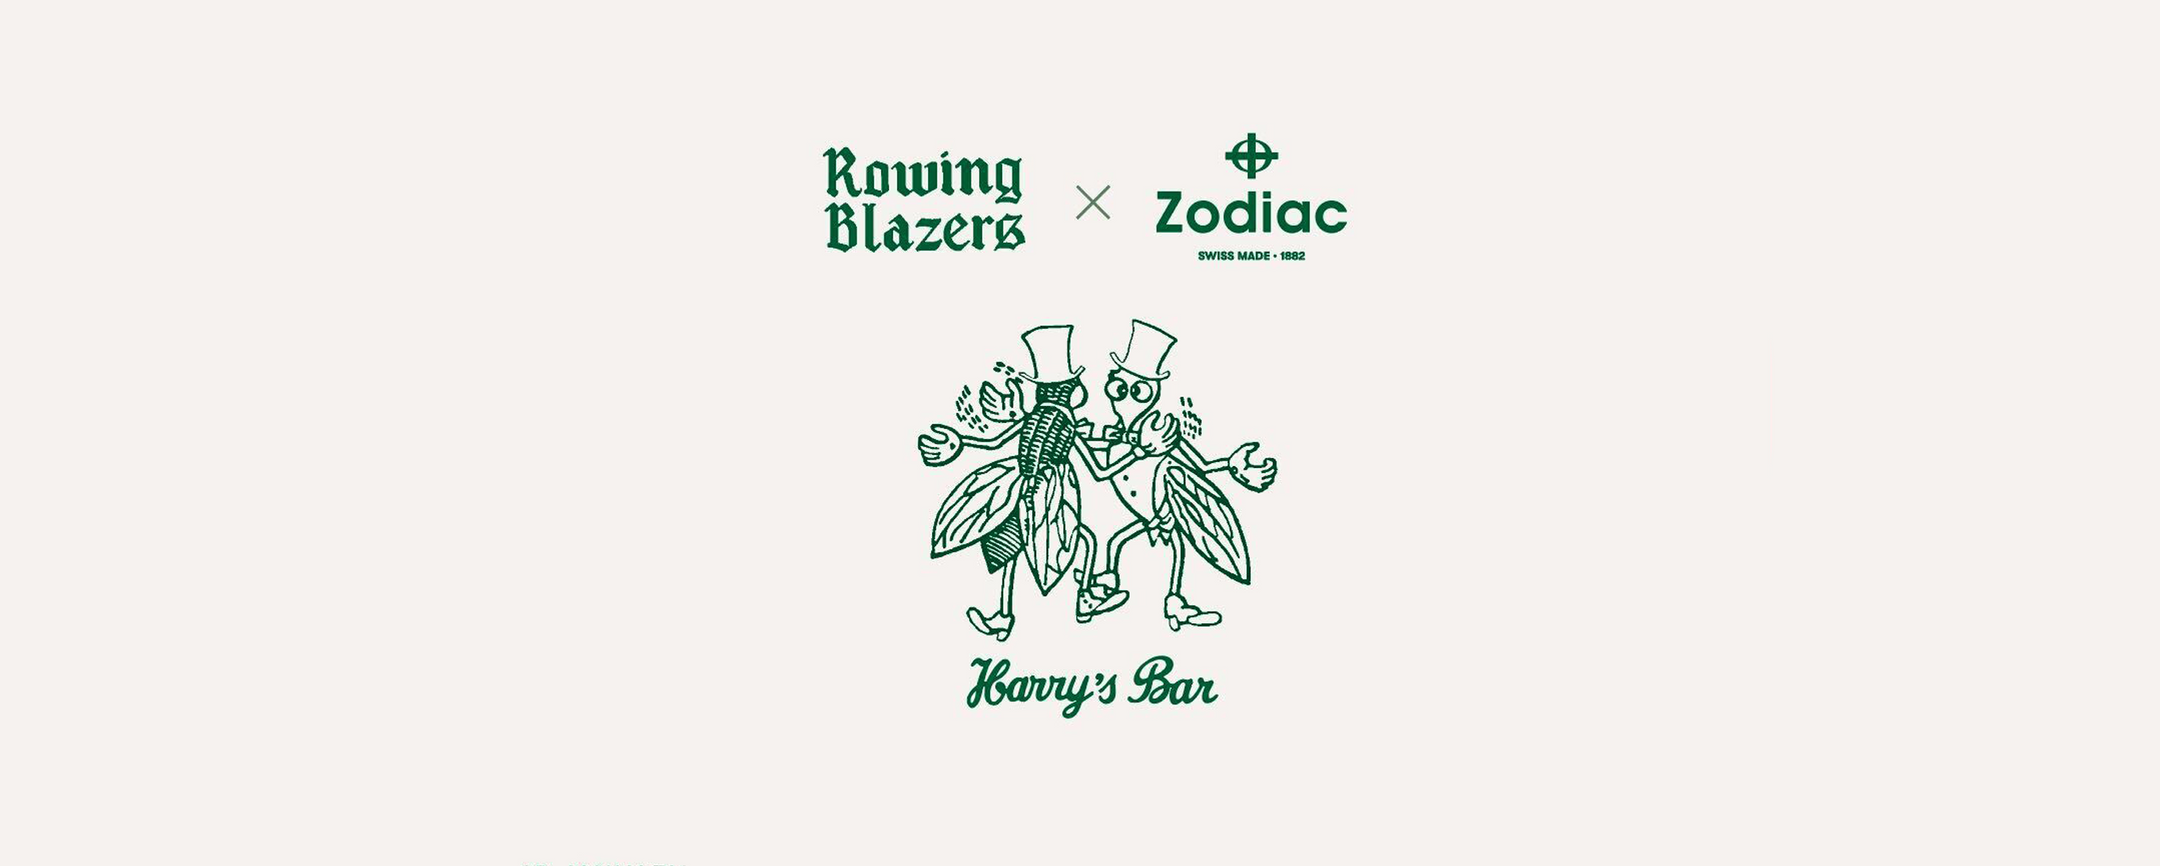 SAVE THE DATE: ZODIAC X ROWING BLAZERS FOR HARRY’S BAR